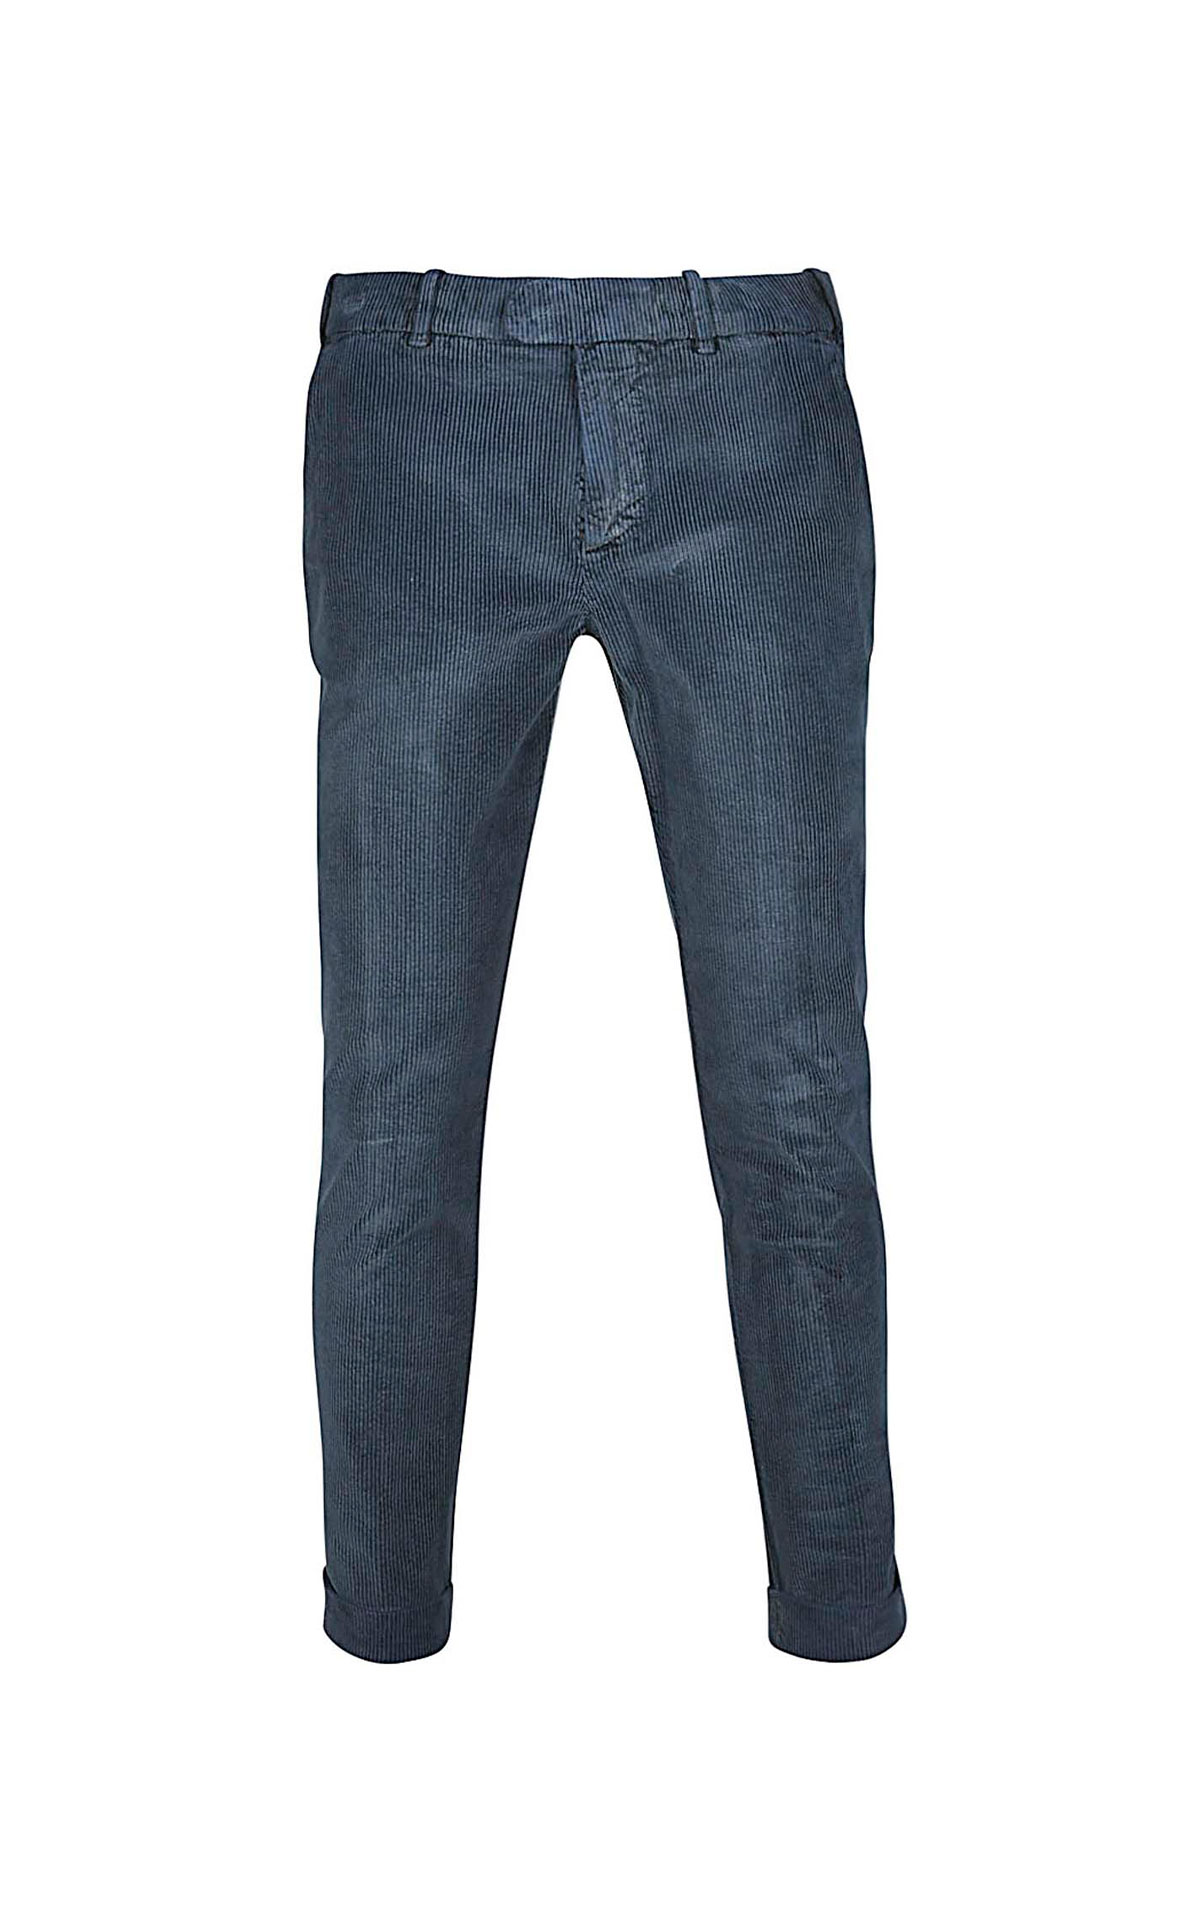 Eleventy Blue trousers from Bicester Village